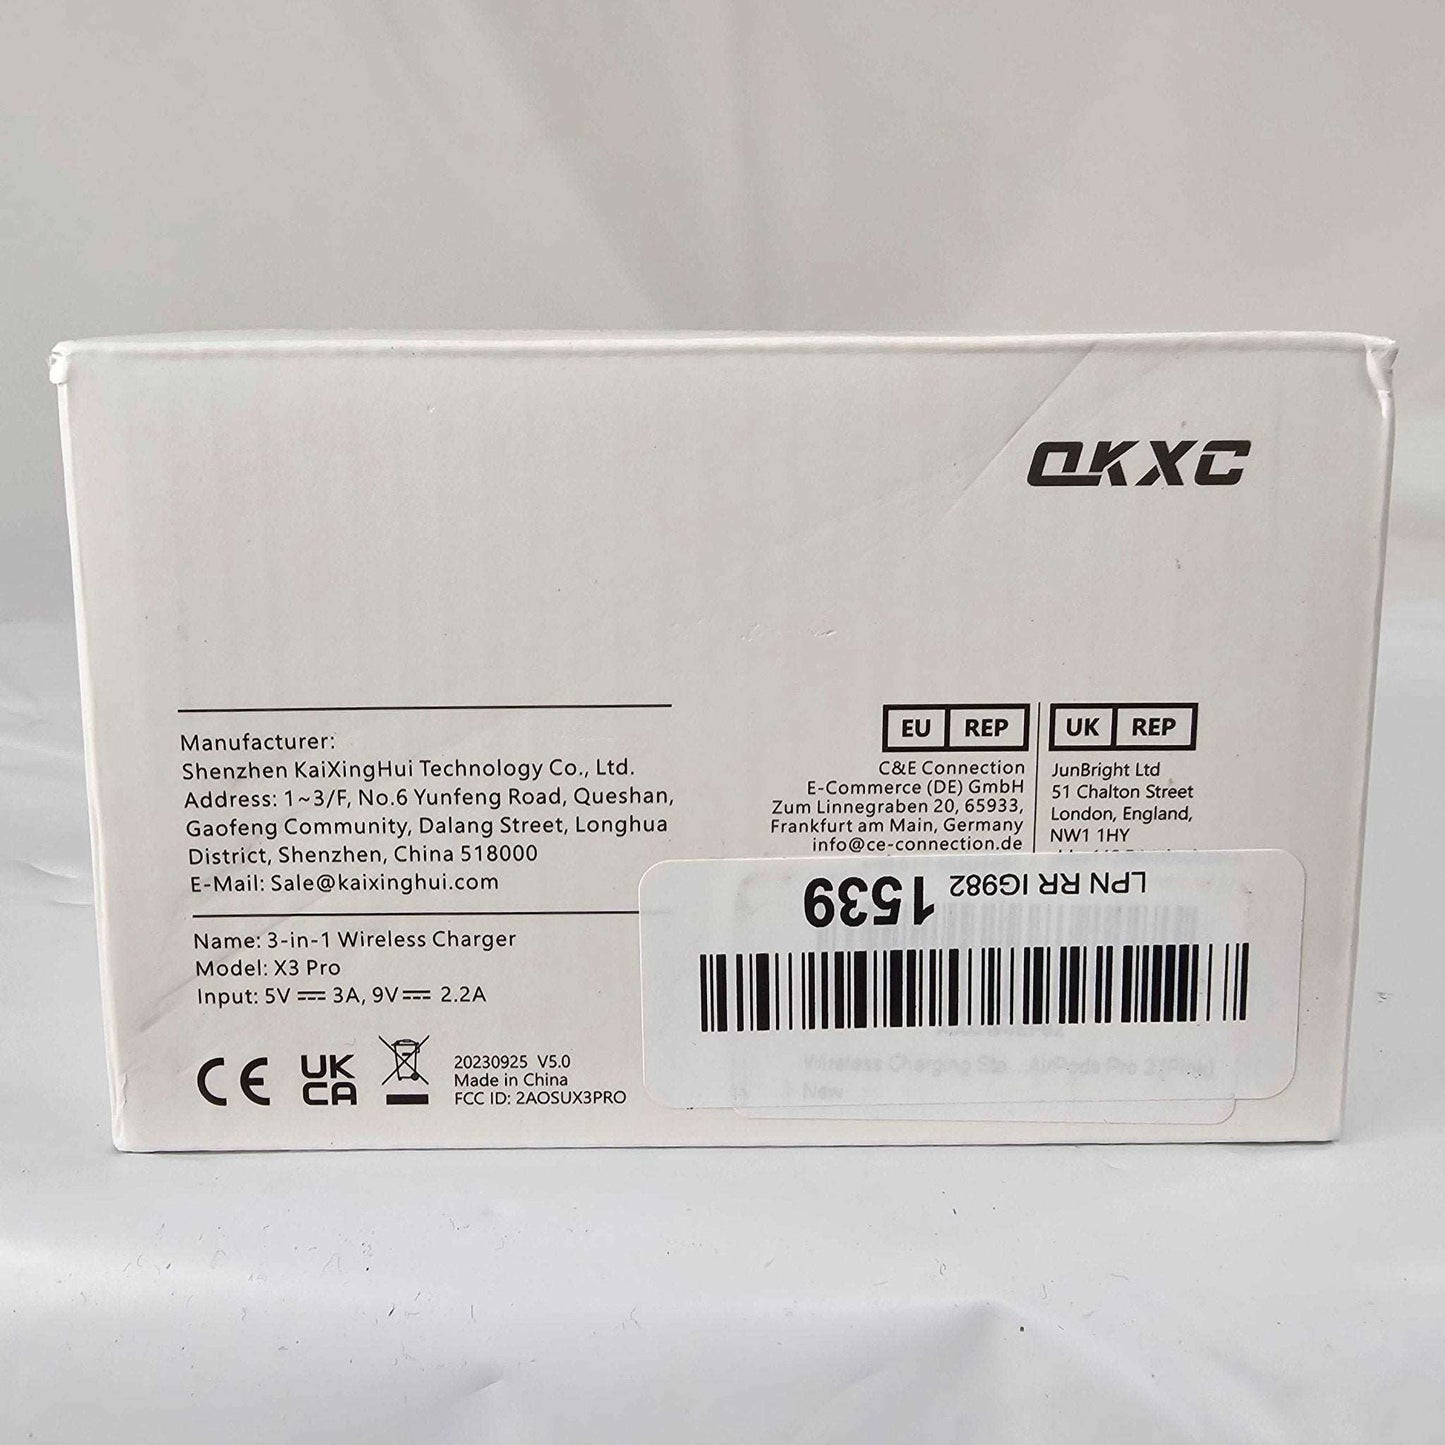 3 in 1 Wireless Charger Qkxc X3Pro - DQ Distribution